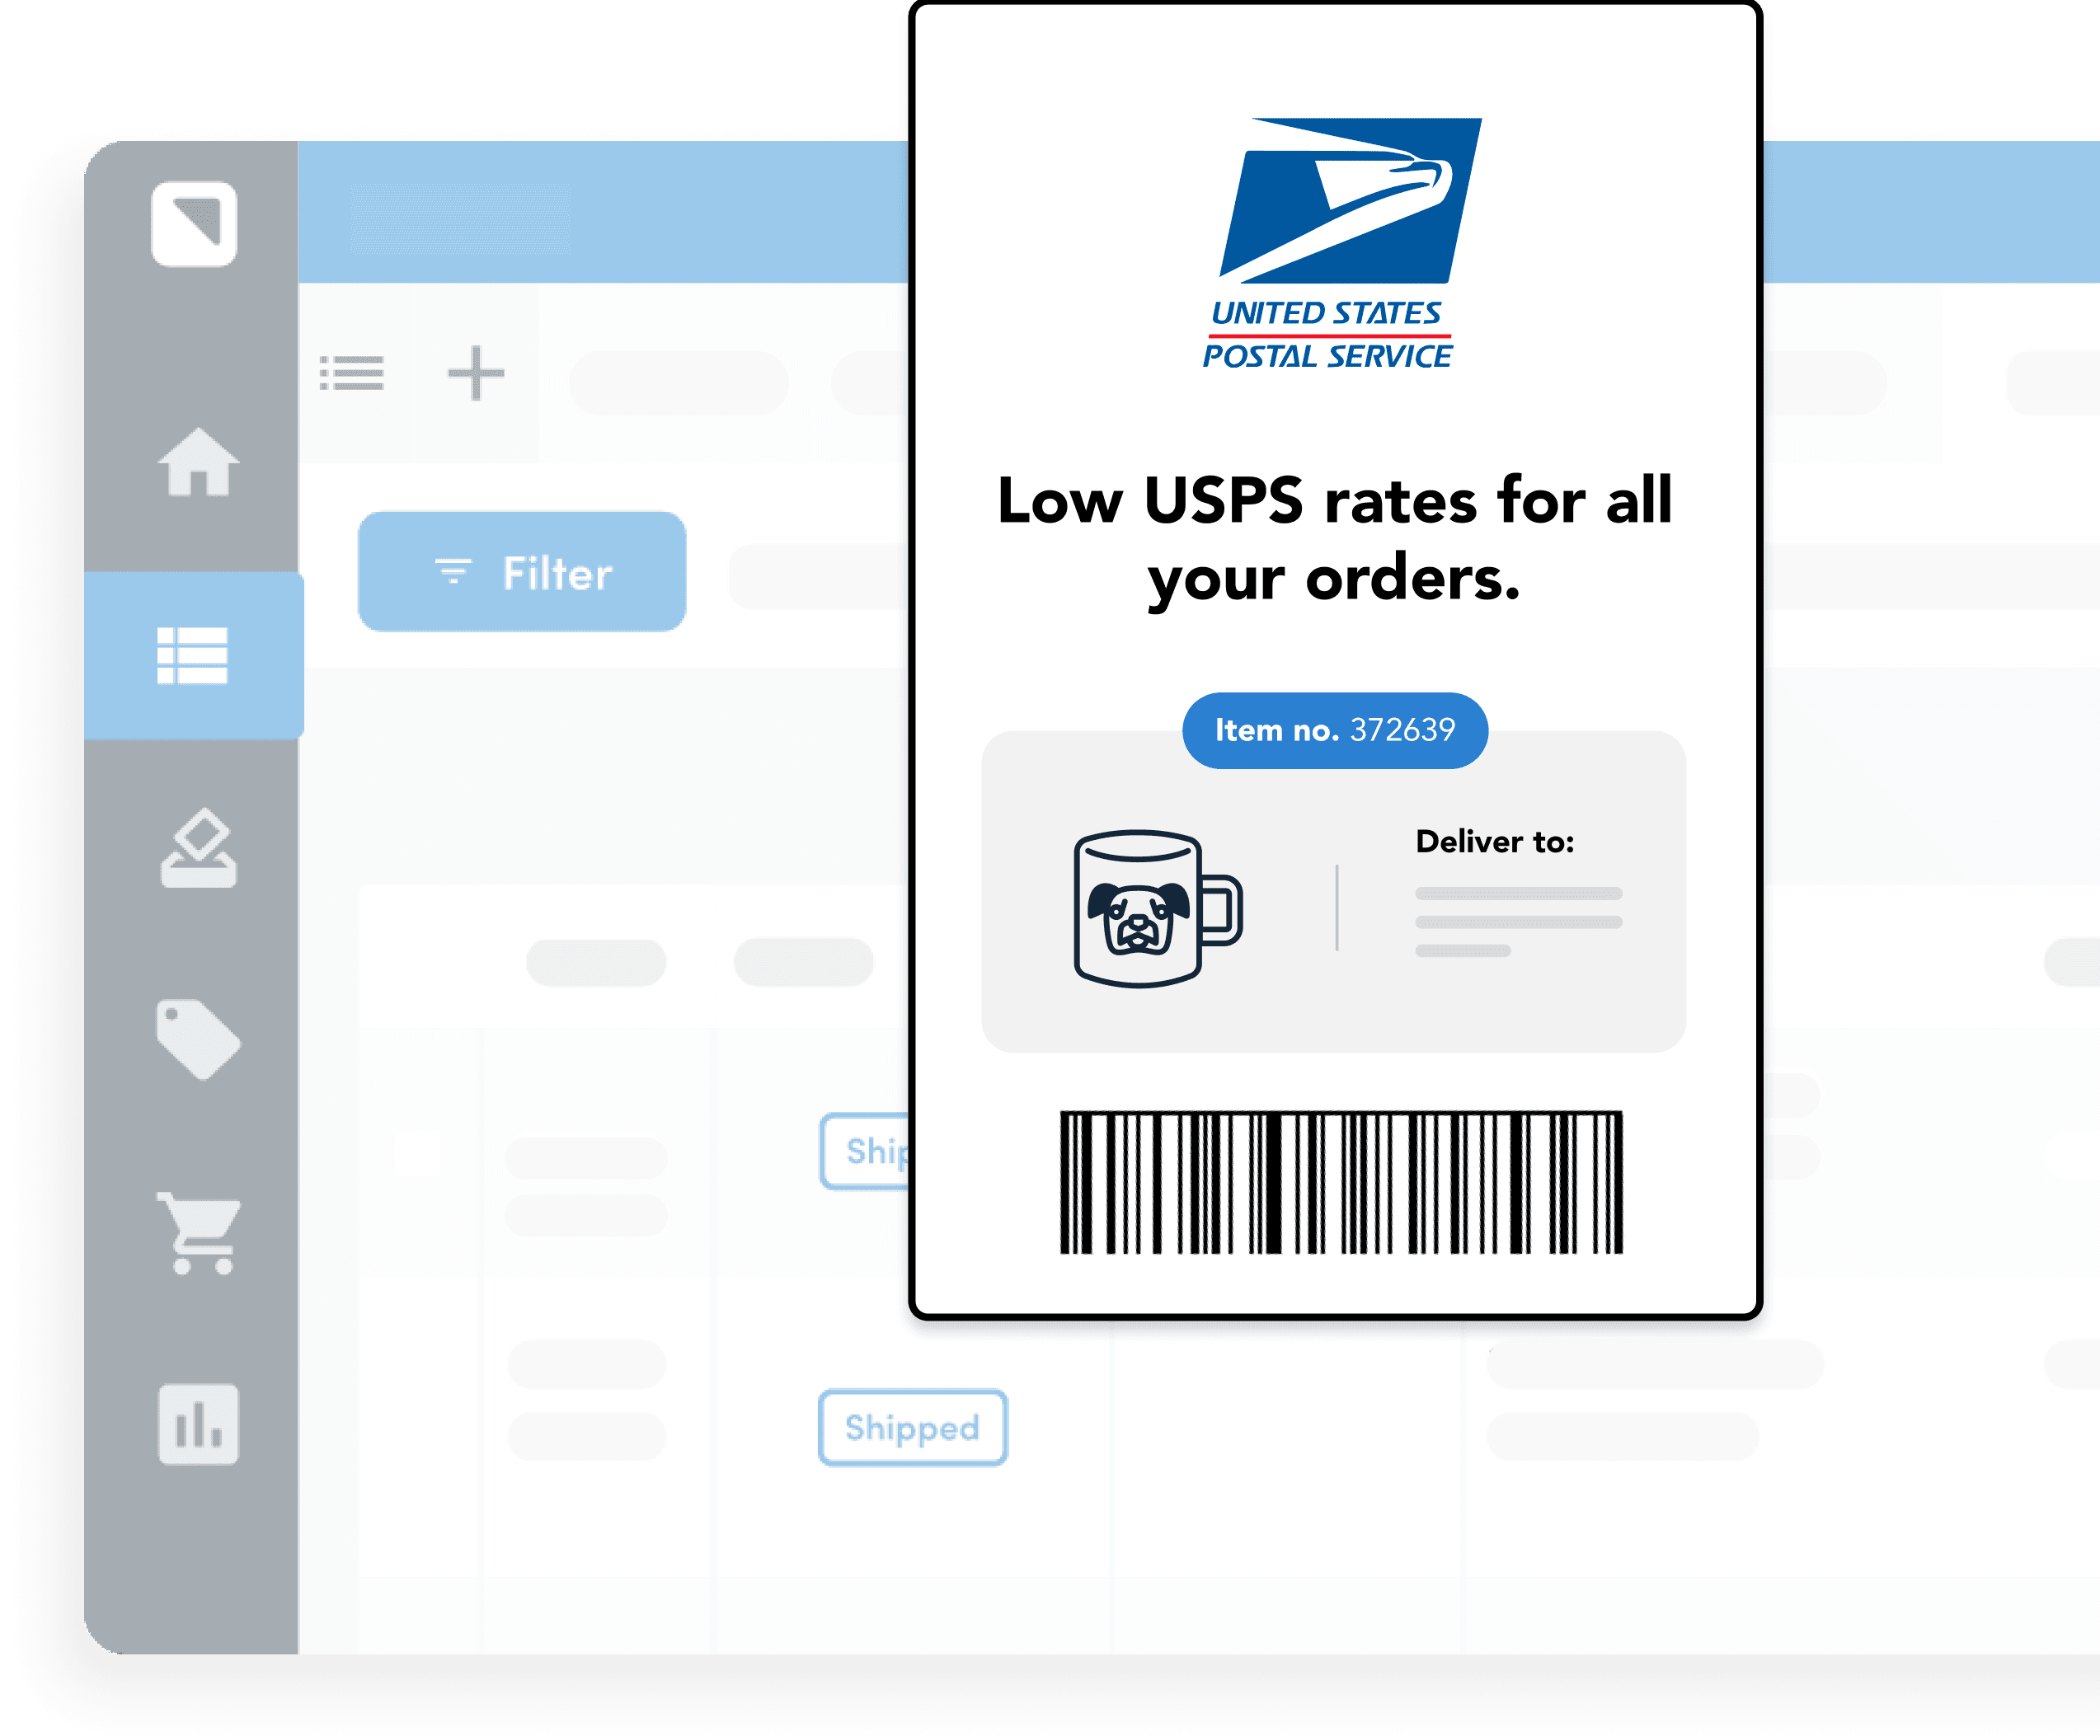 Low USPS rates for all your orders.